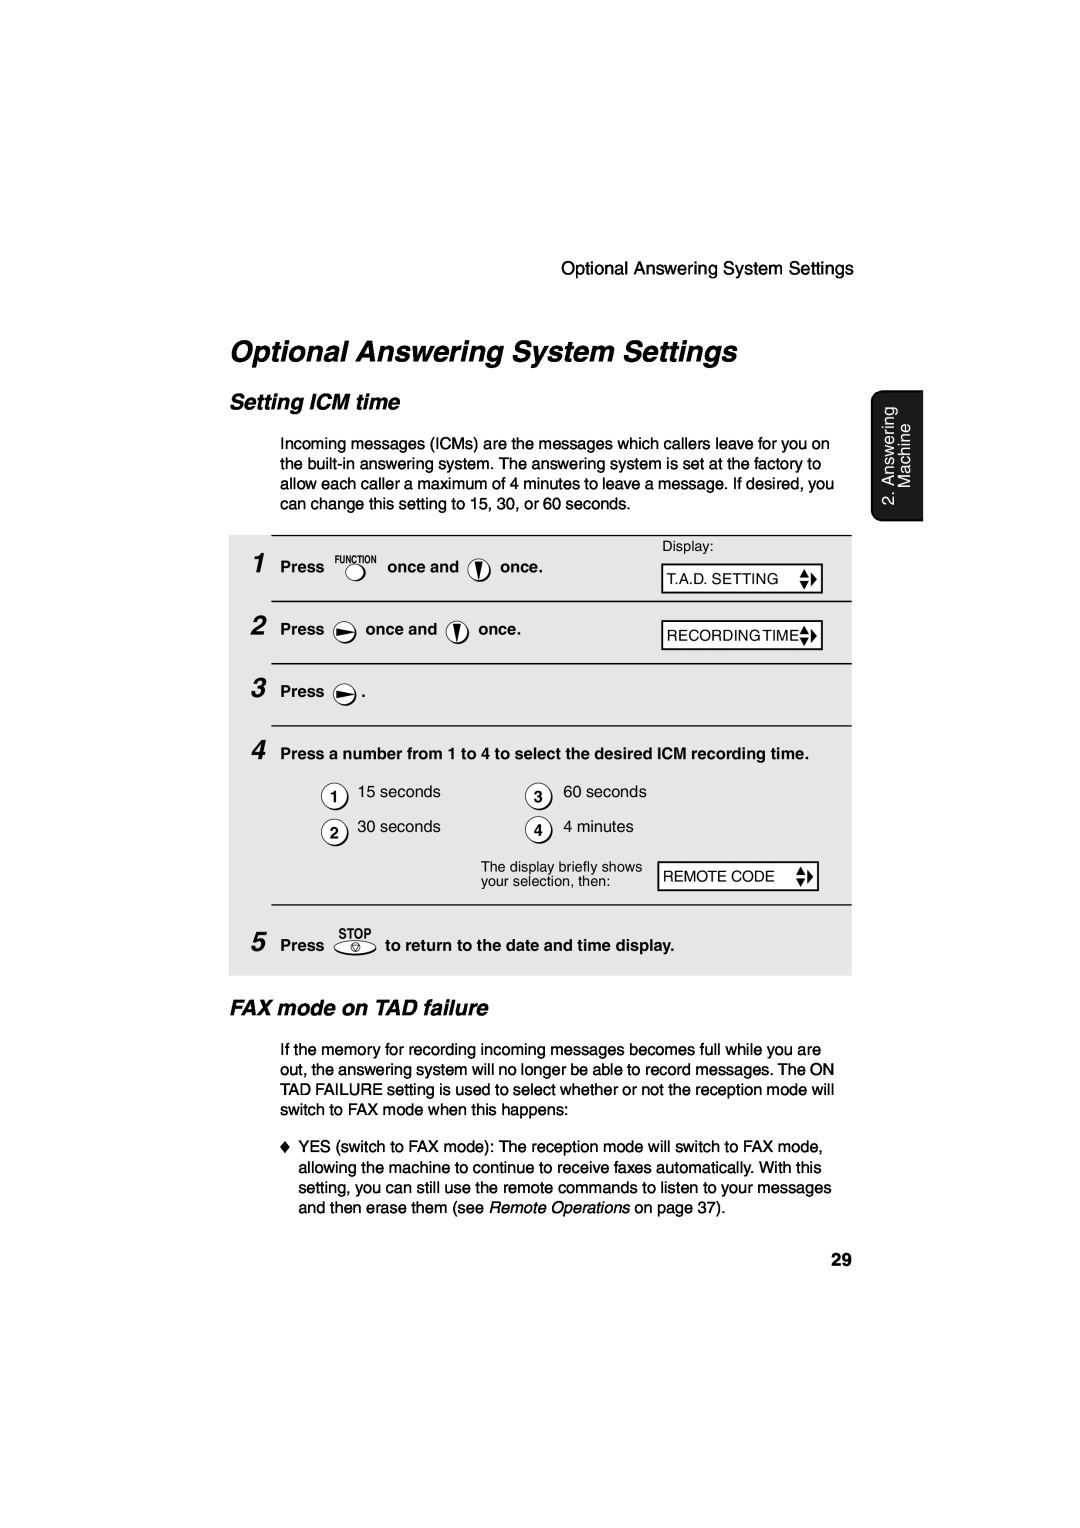 Sharp UX-A260 manual Optional Answering System Settings, Setting ICM time, FAX mode on TAD failure, Machine 